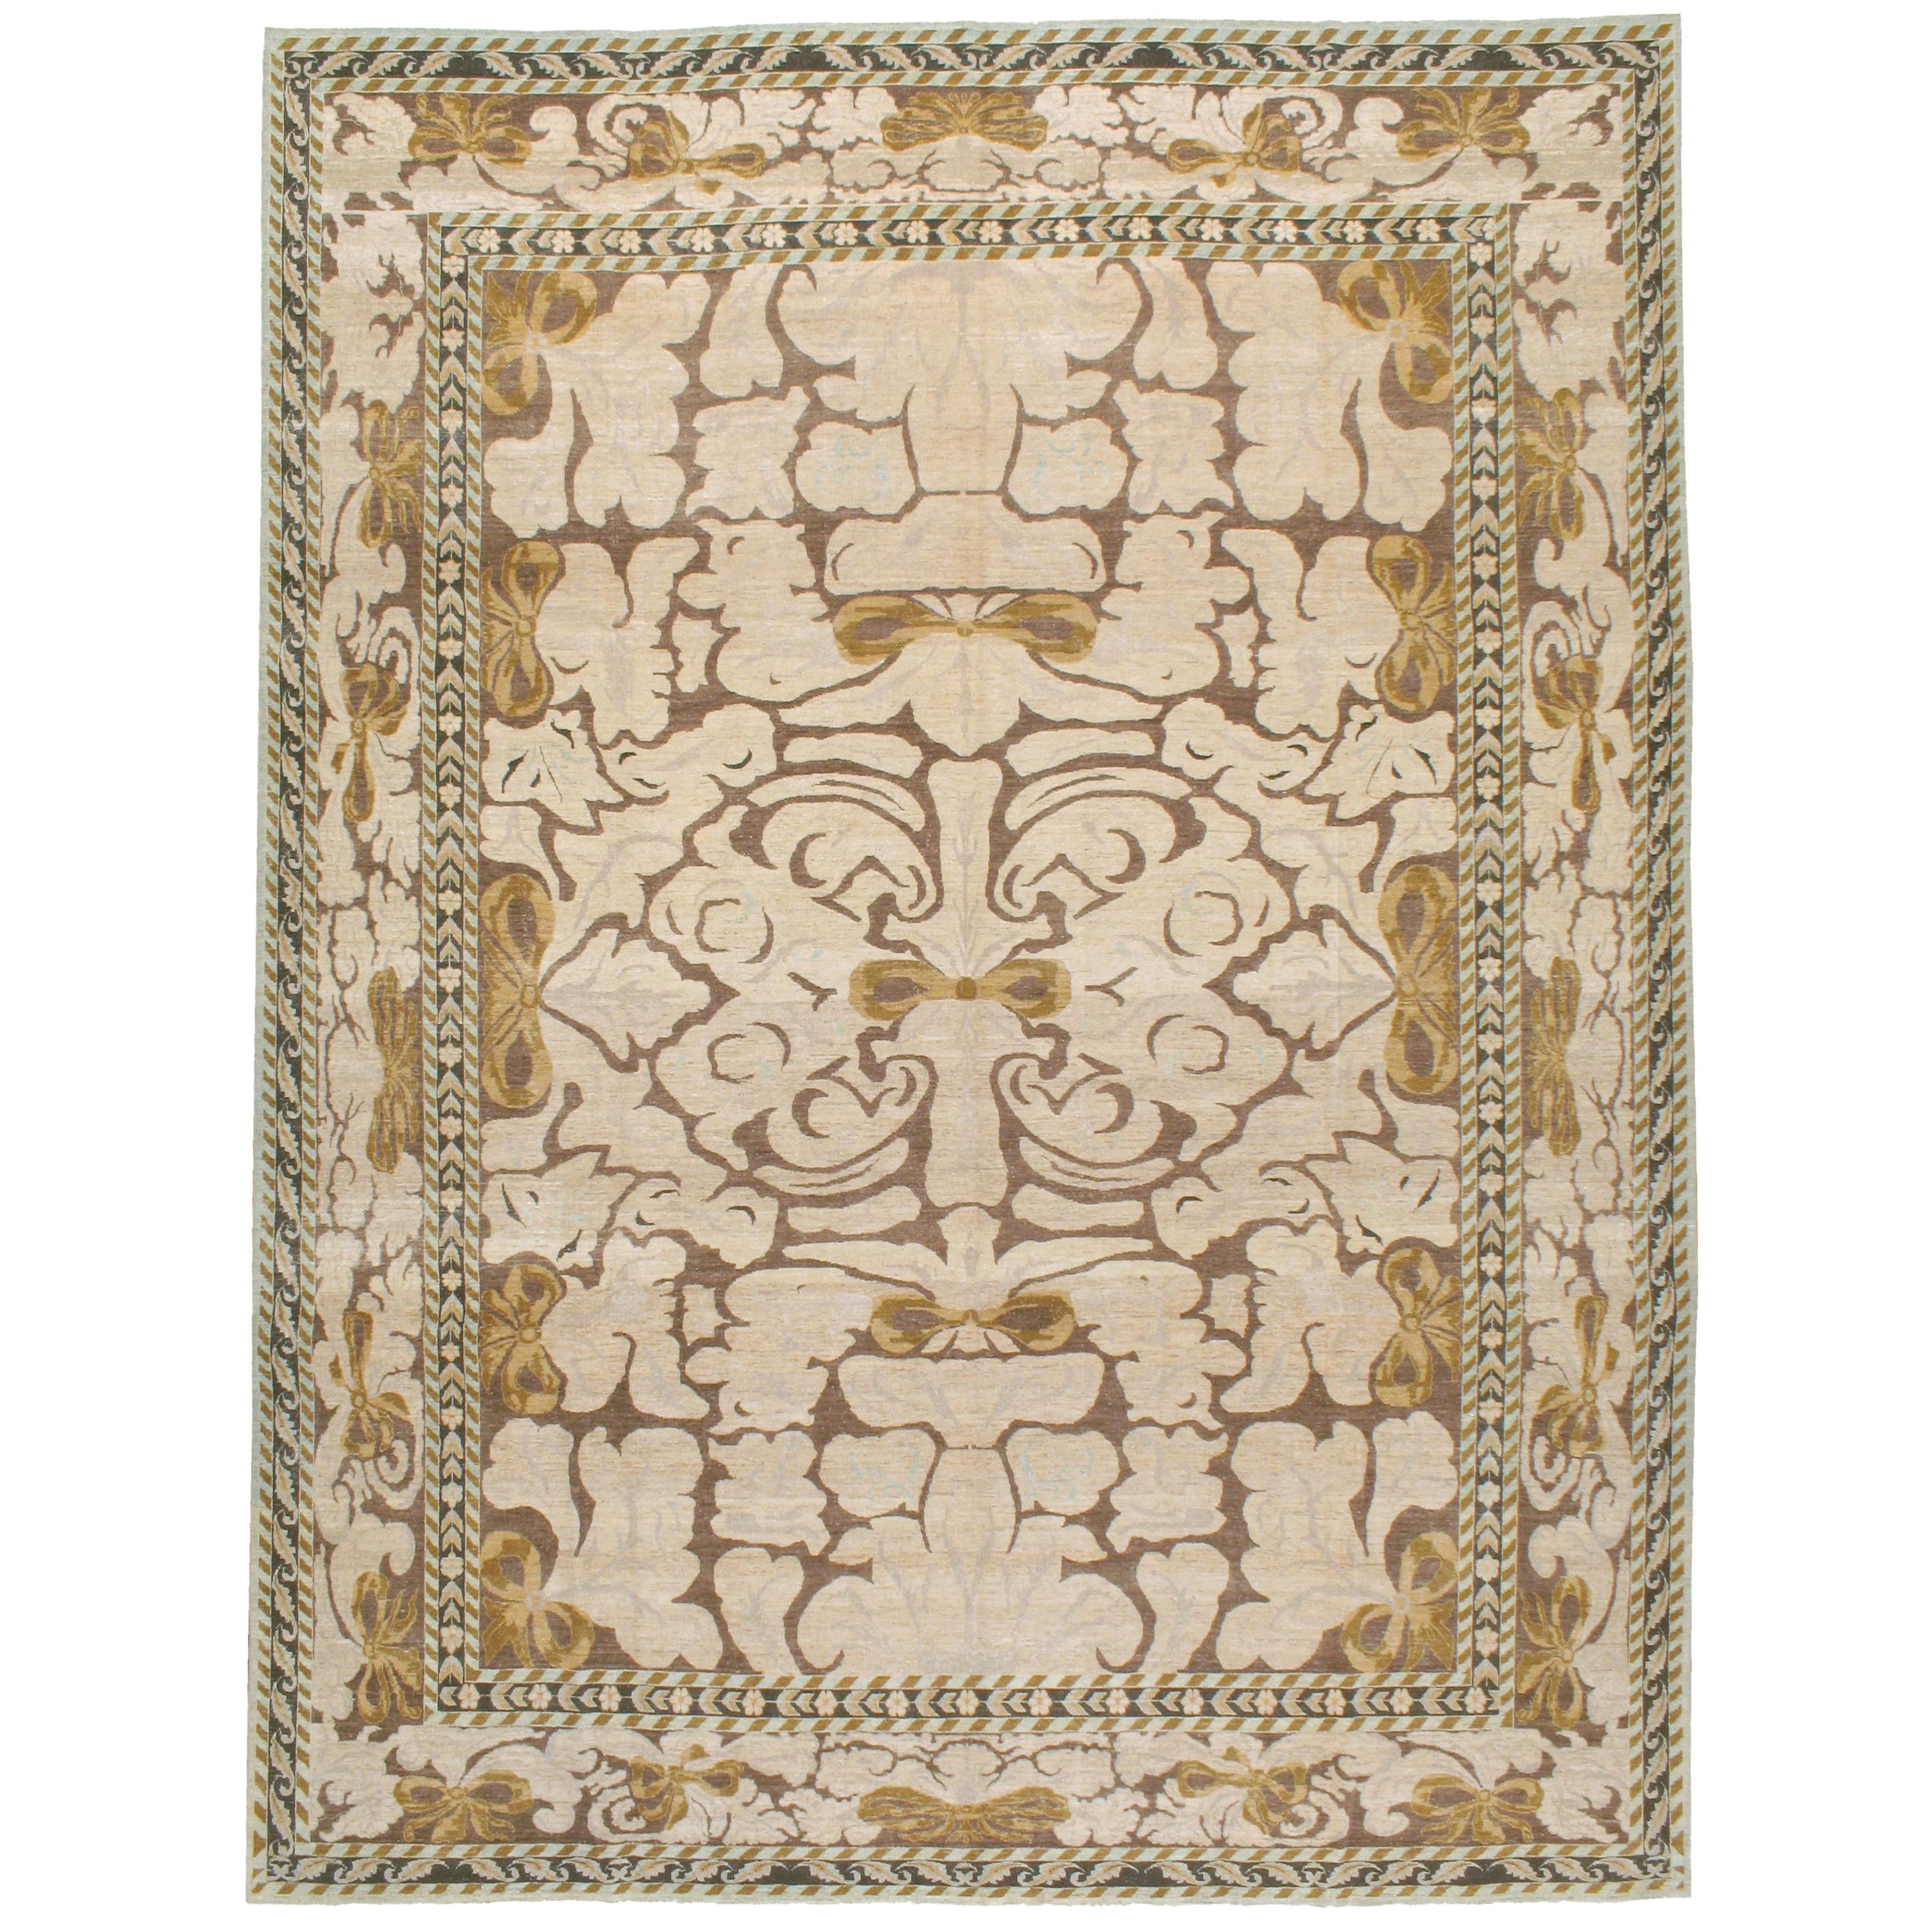 Contemporary Handmade Persian Room Size Carpet In Viennese Secession Style im Angebot